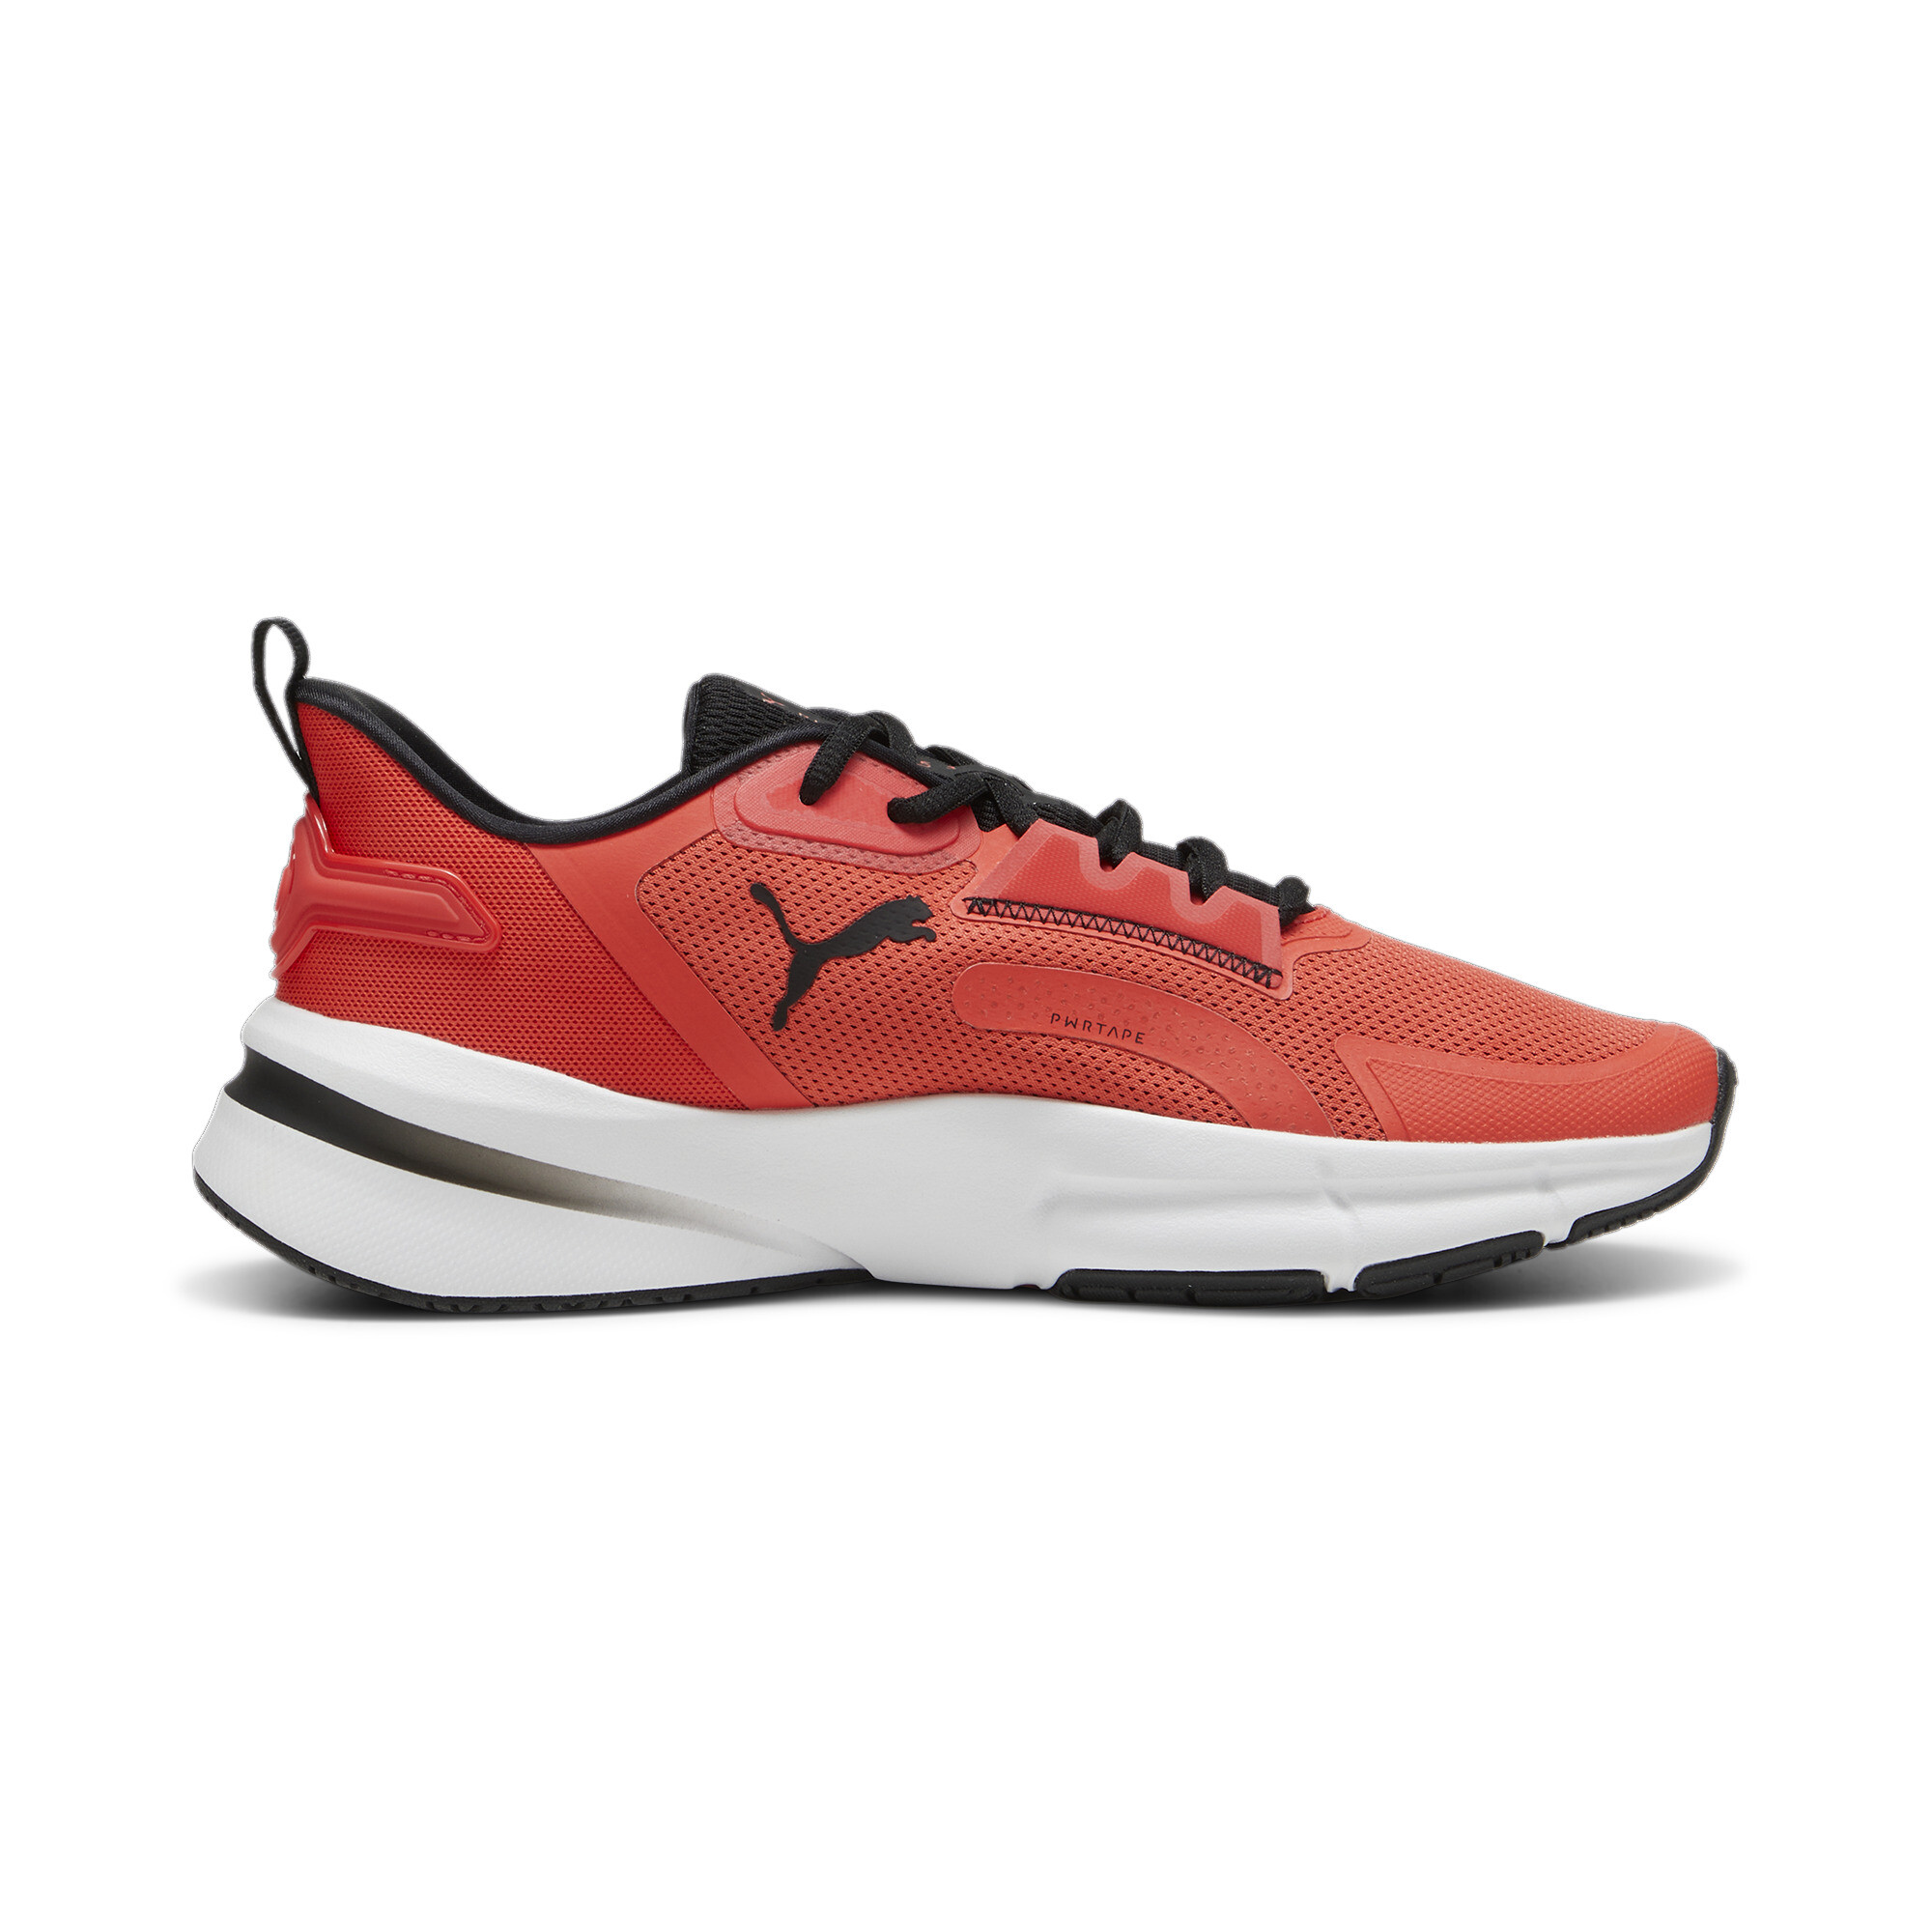 Men's PUMA PWRFrame TR 3 Training Shoes In Red, Size EU 48.5